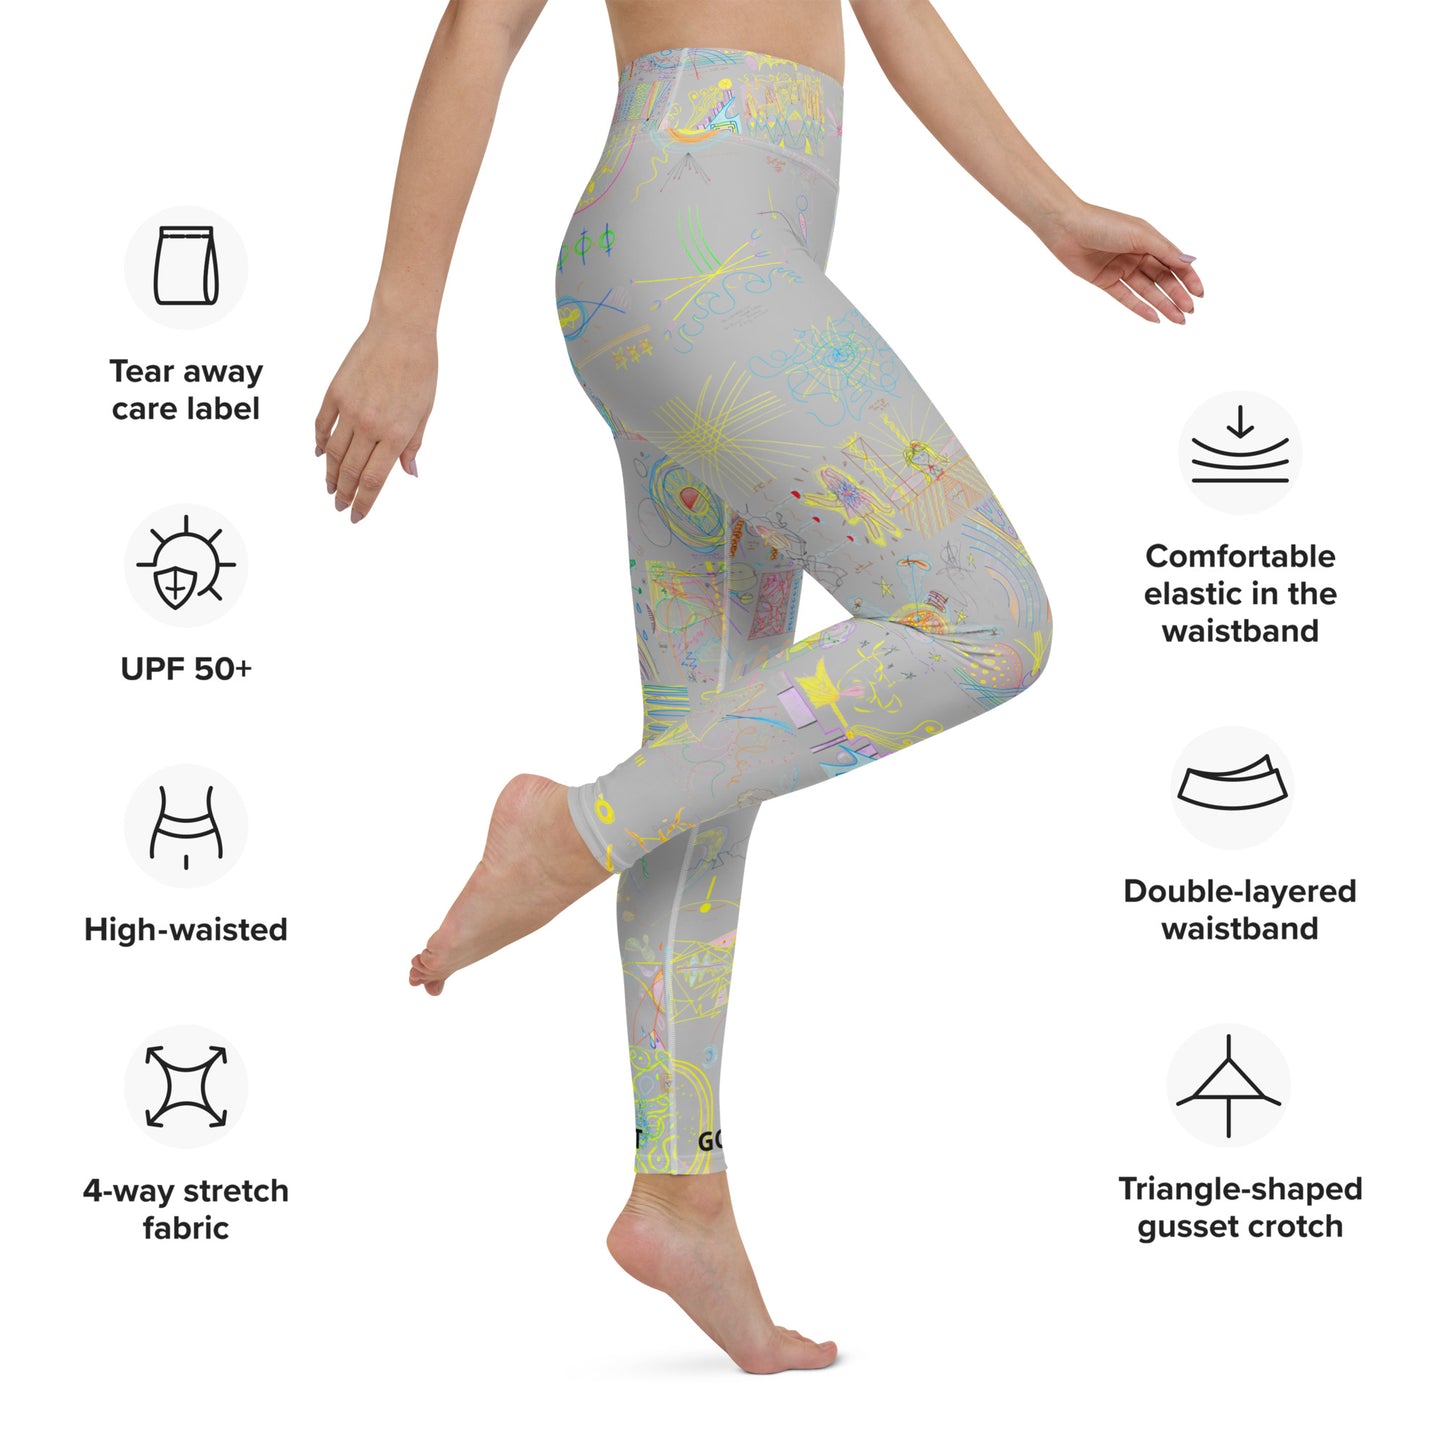 Stretch Now, leggings in silver